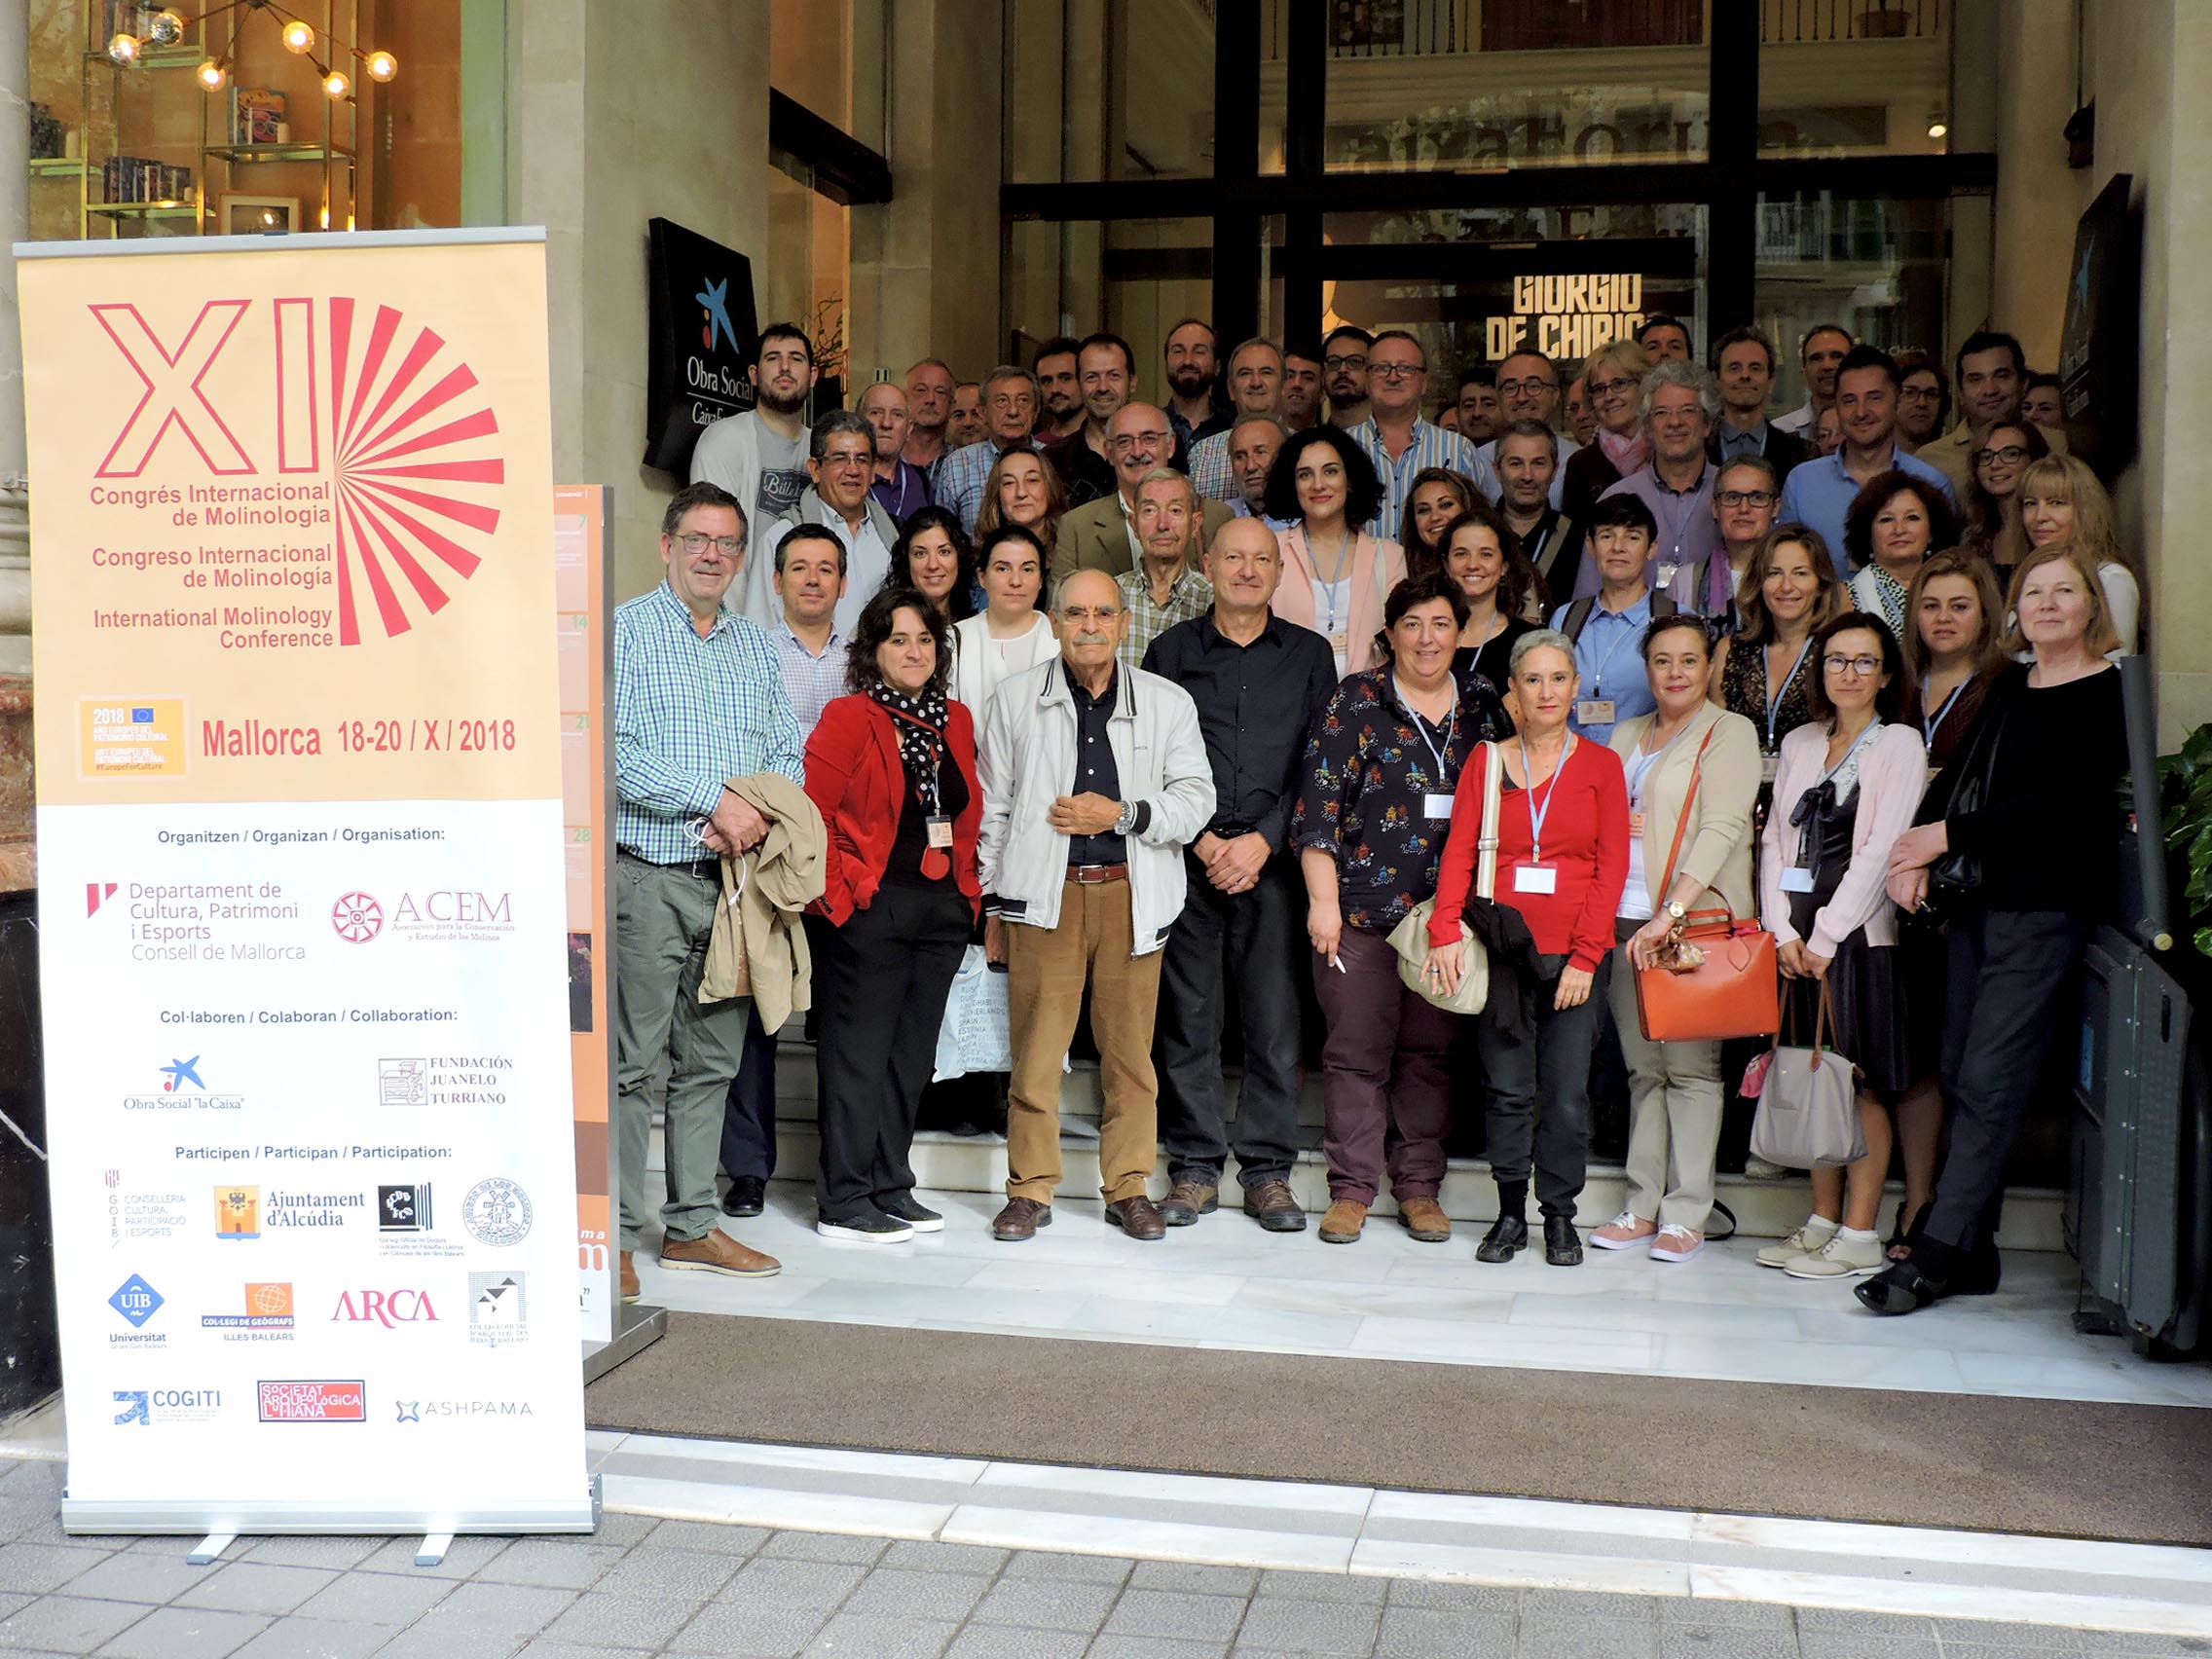 XI International Molinology Conference. Family portrait of the attendees and participants at the Conference.